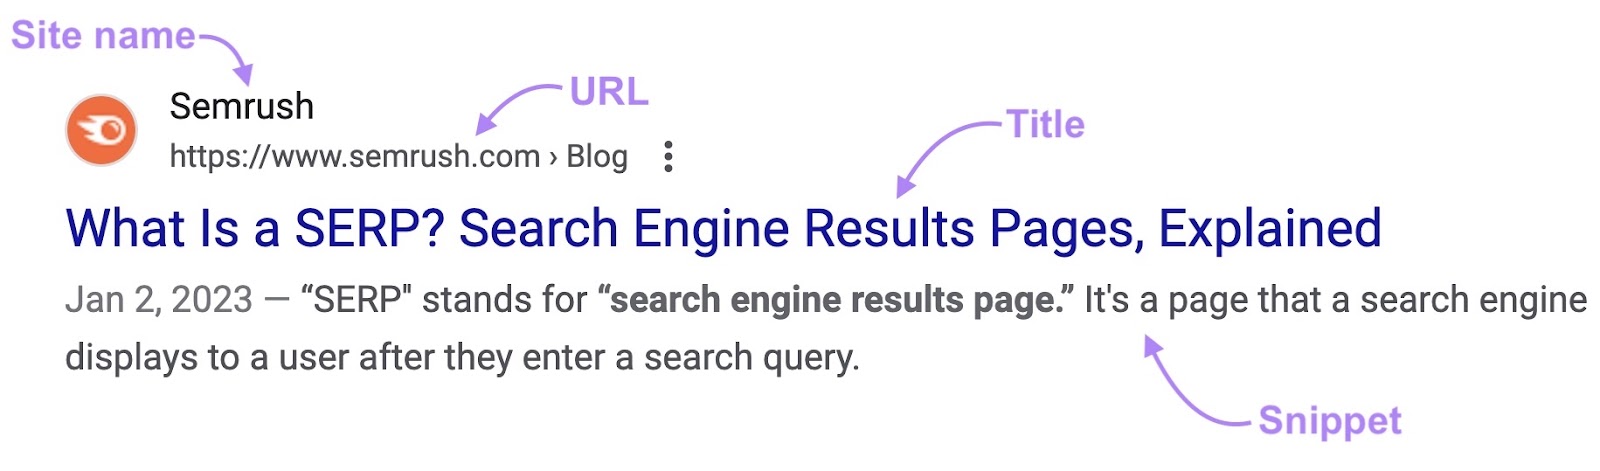 A SERP result with site name, URL, title and a snippet labels